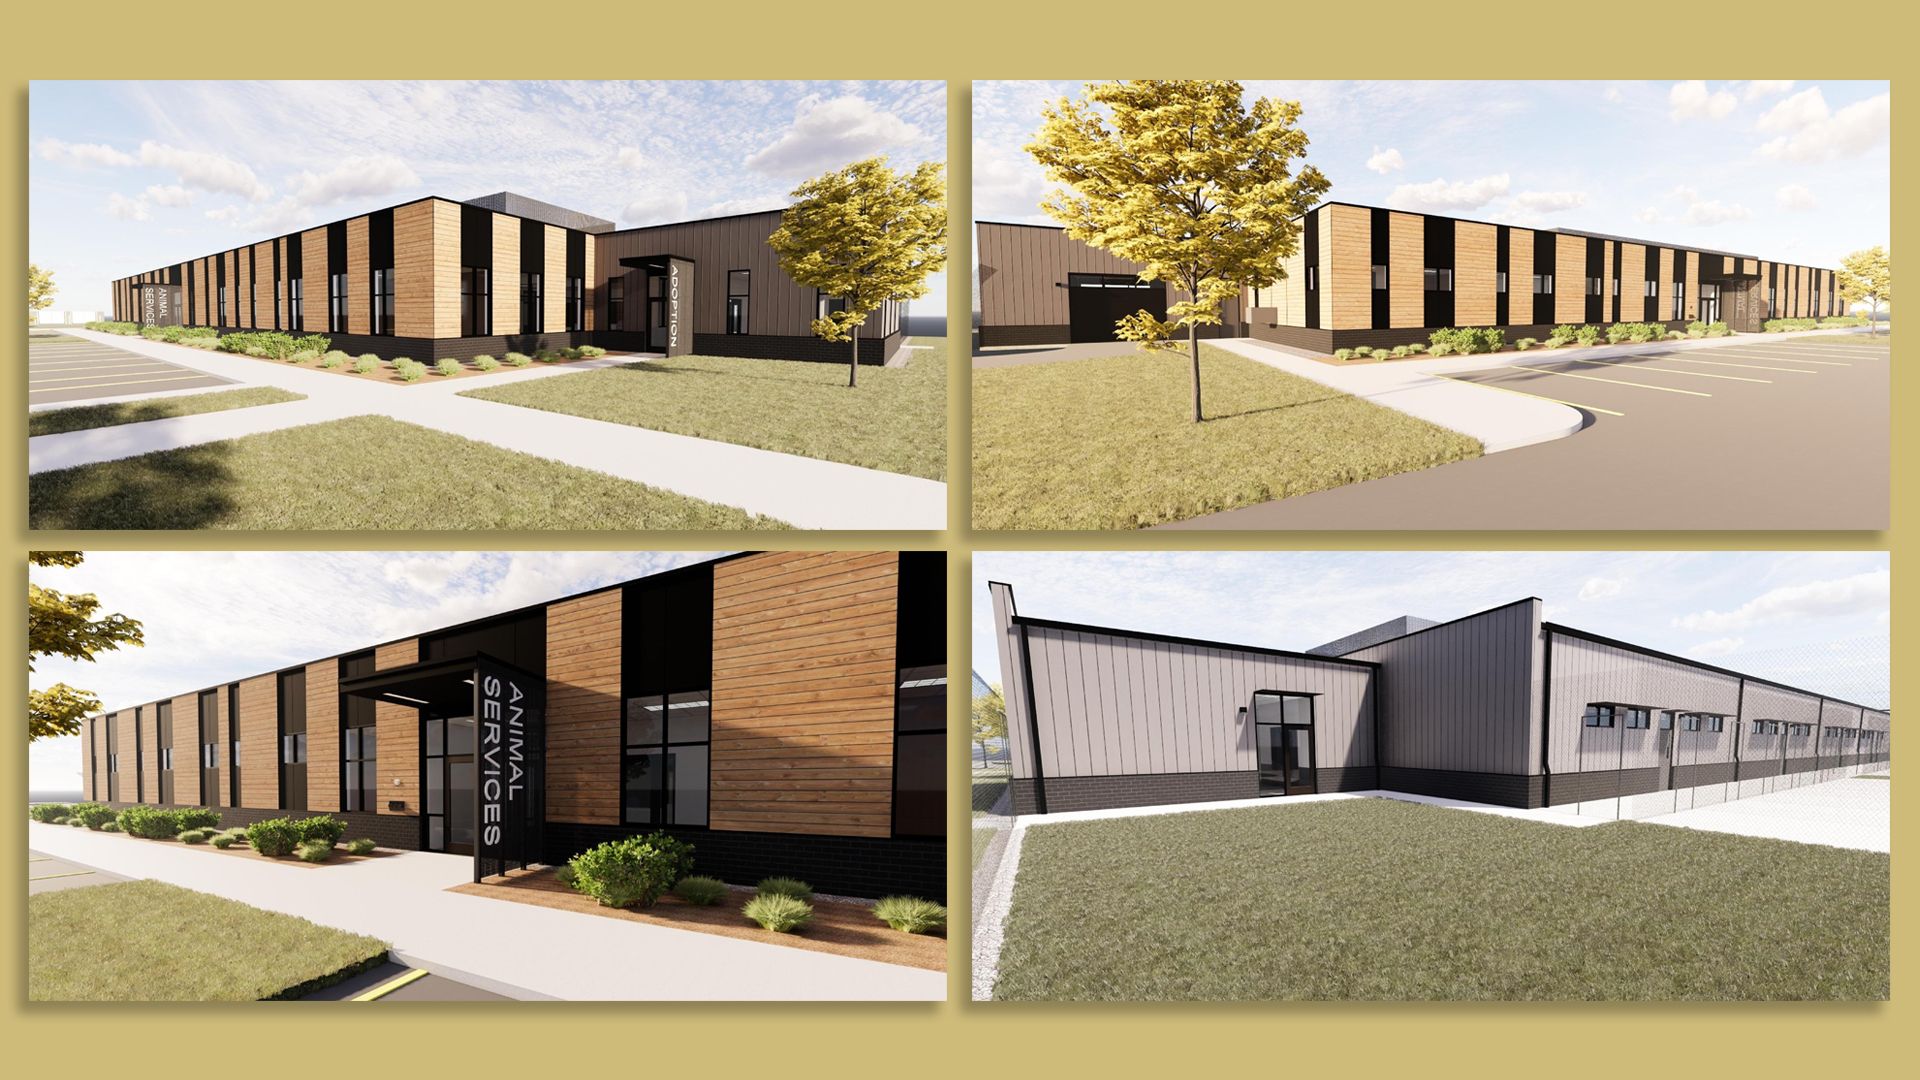 A drawing of a proposed Des Moines animal shelter.